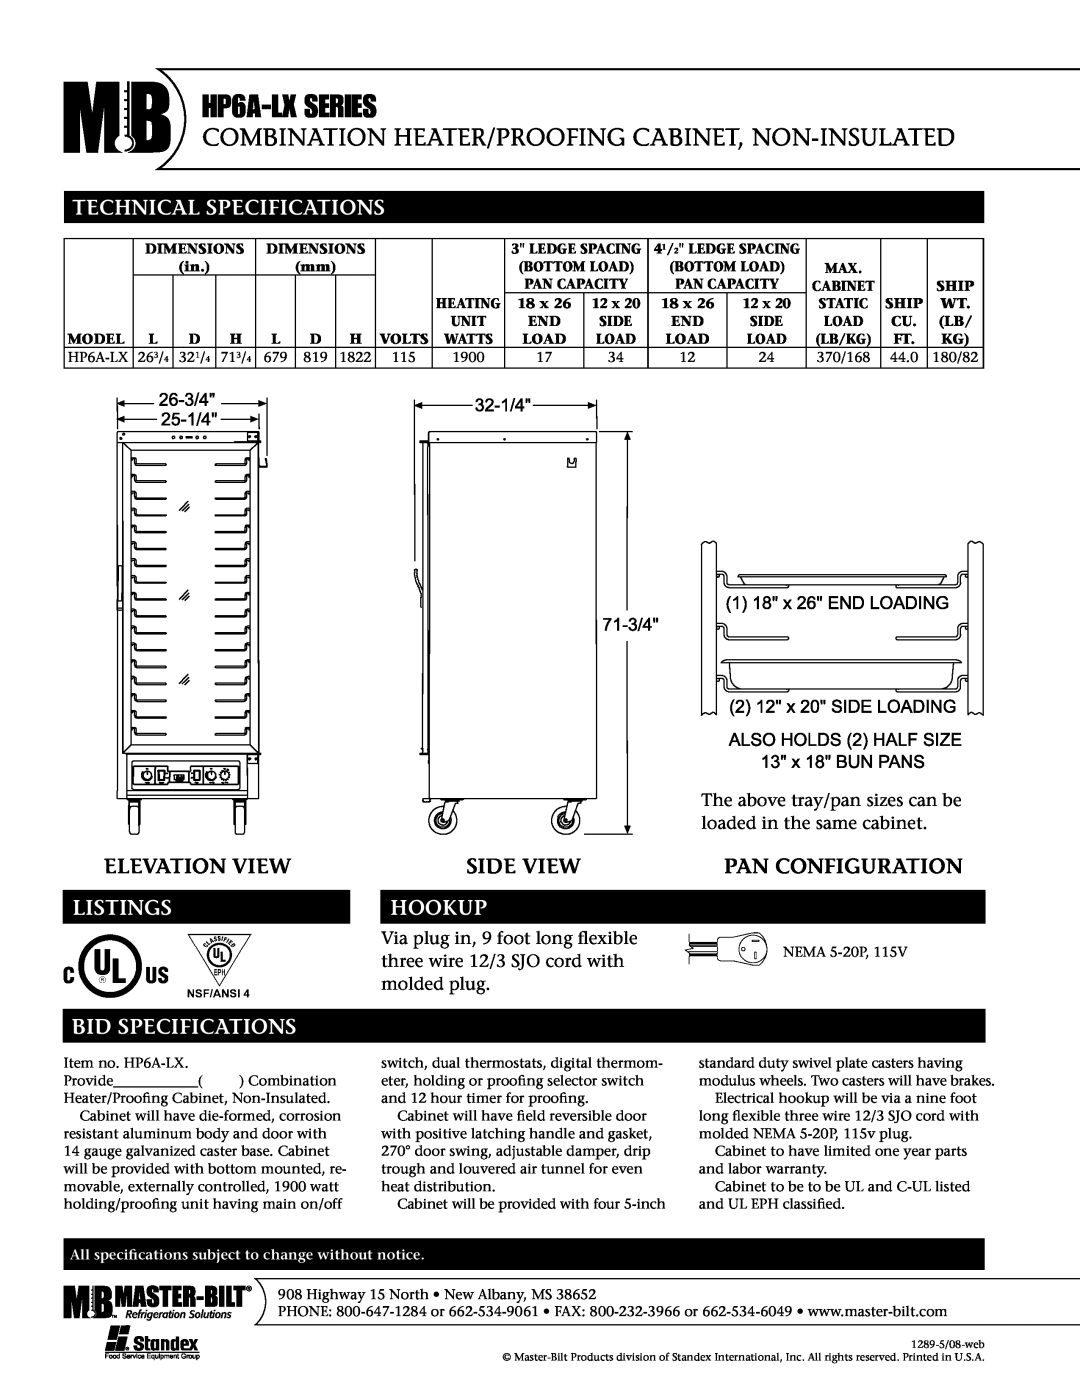 Master Bilt HP6A-LX Series Technical Specifications, Elevation View, Listings, Side View, Pan Configuration, Hookup 